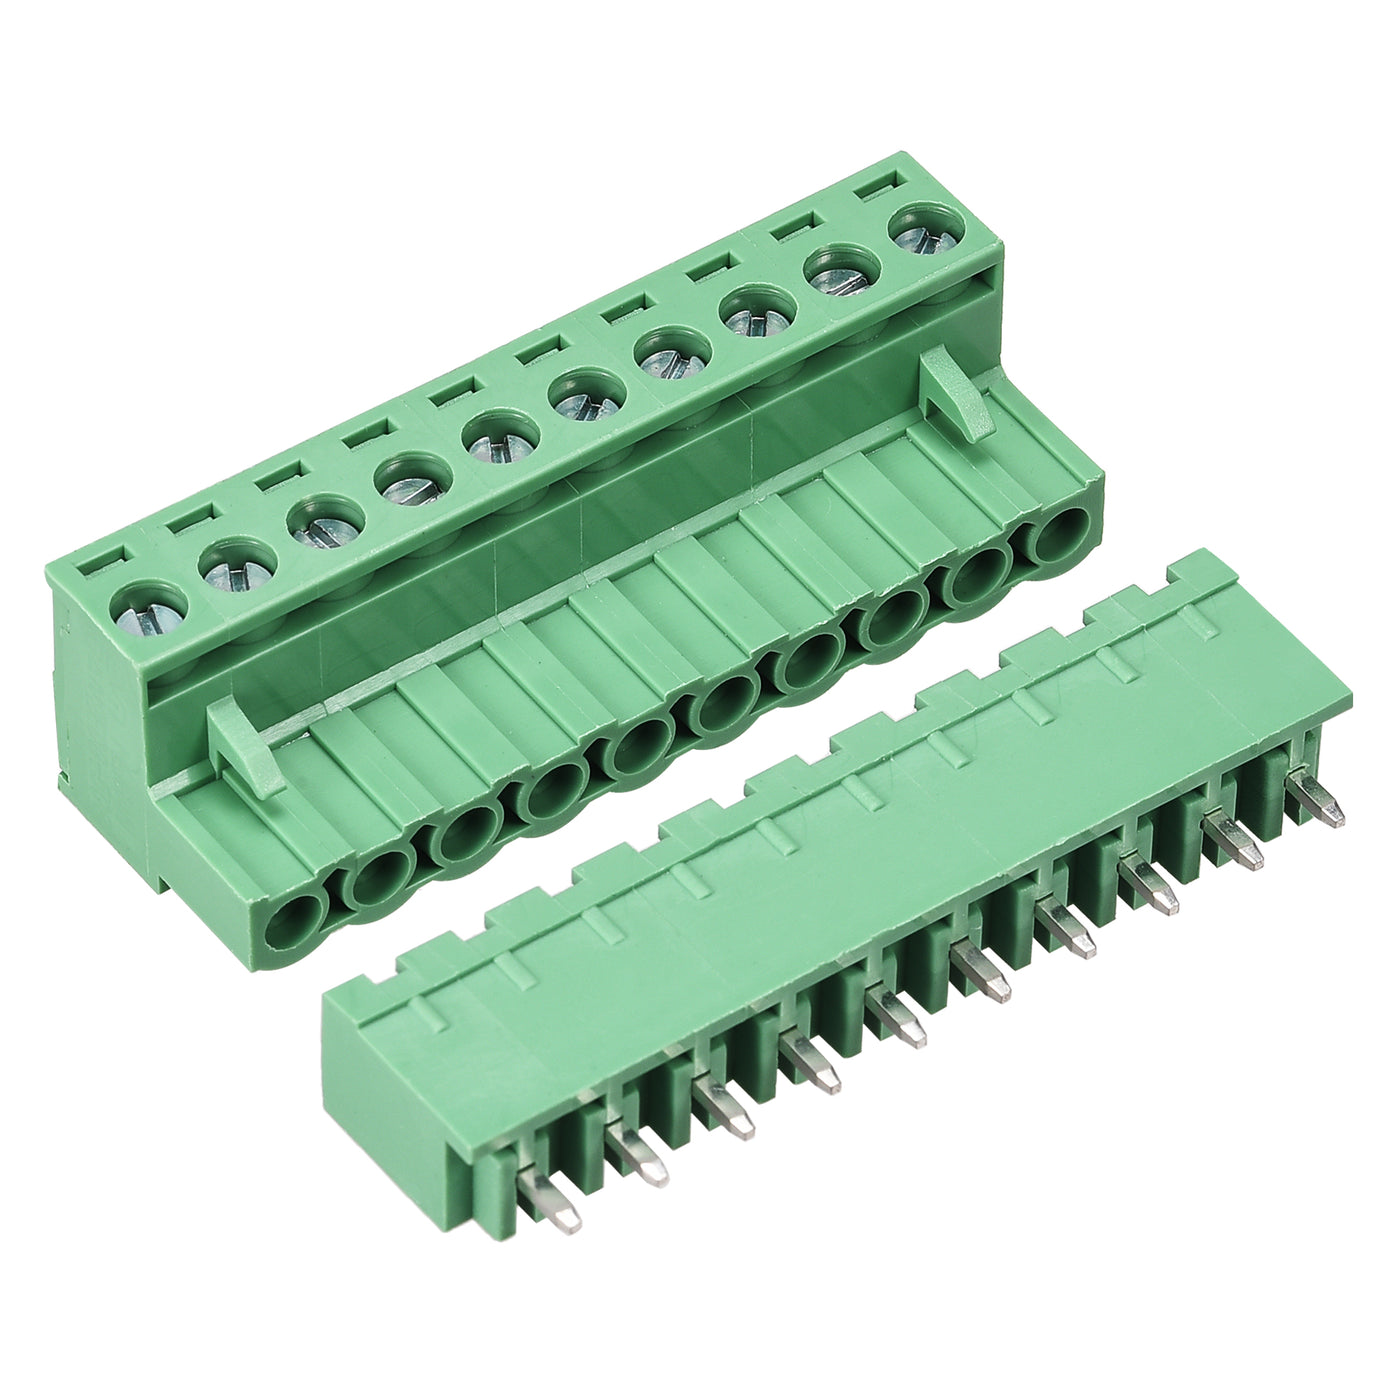 uxcell Uxcell 10 Pin 5.08mm Pitch Male Female PCB Screw Terminal Block 5 Sets